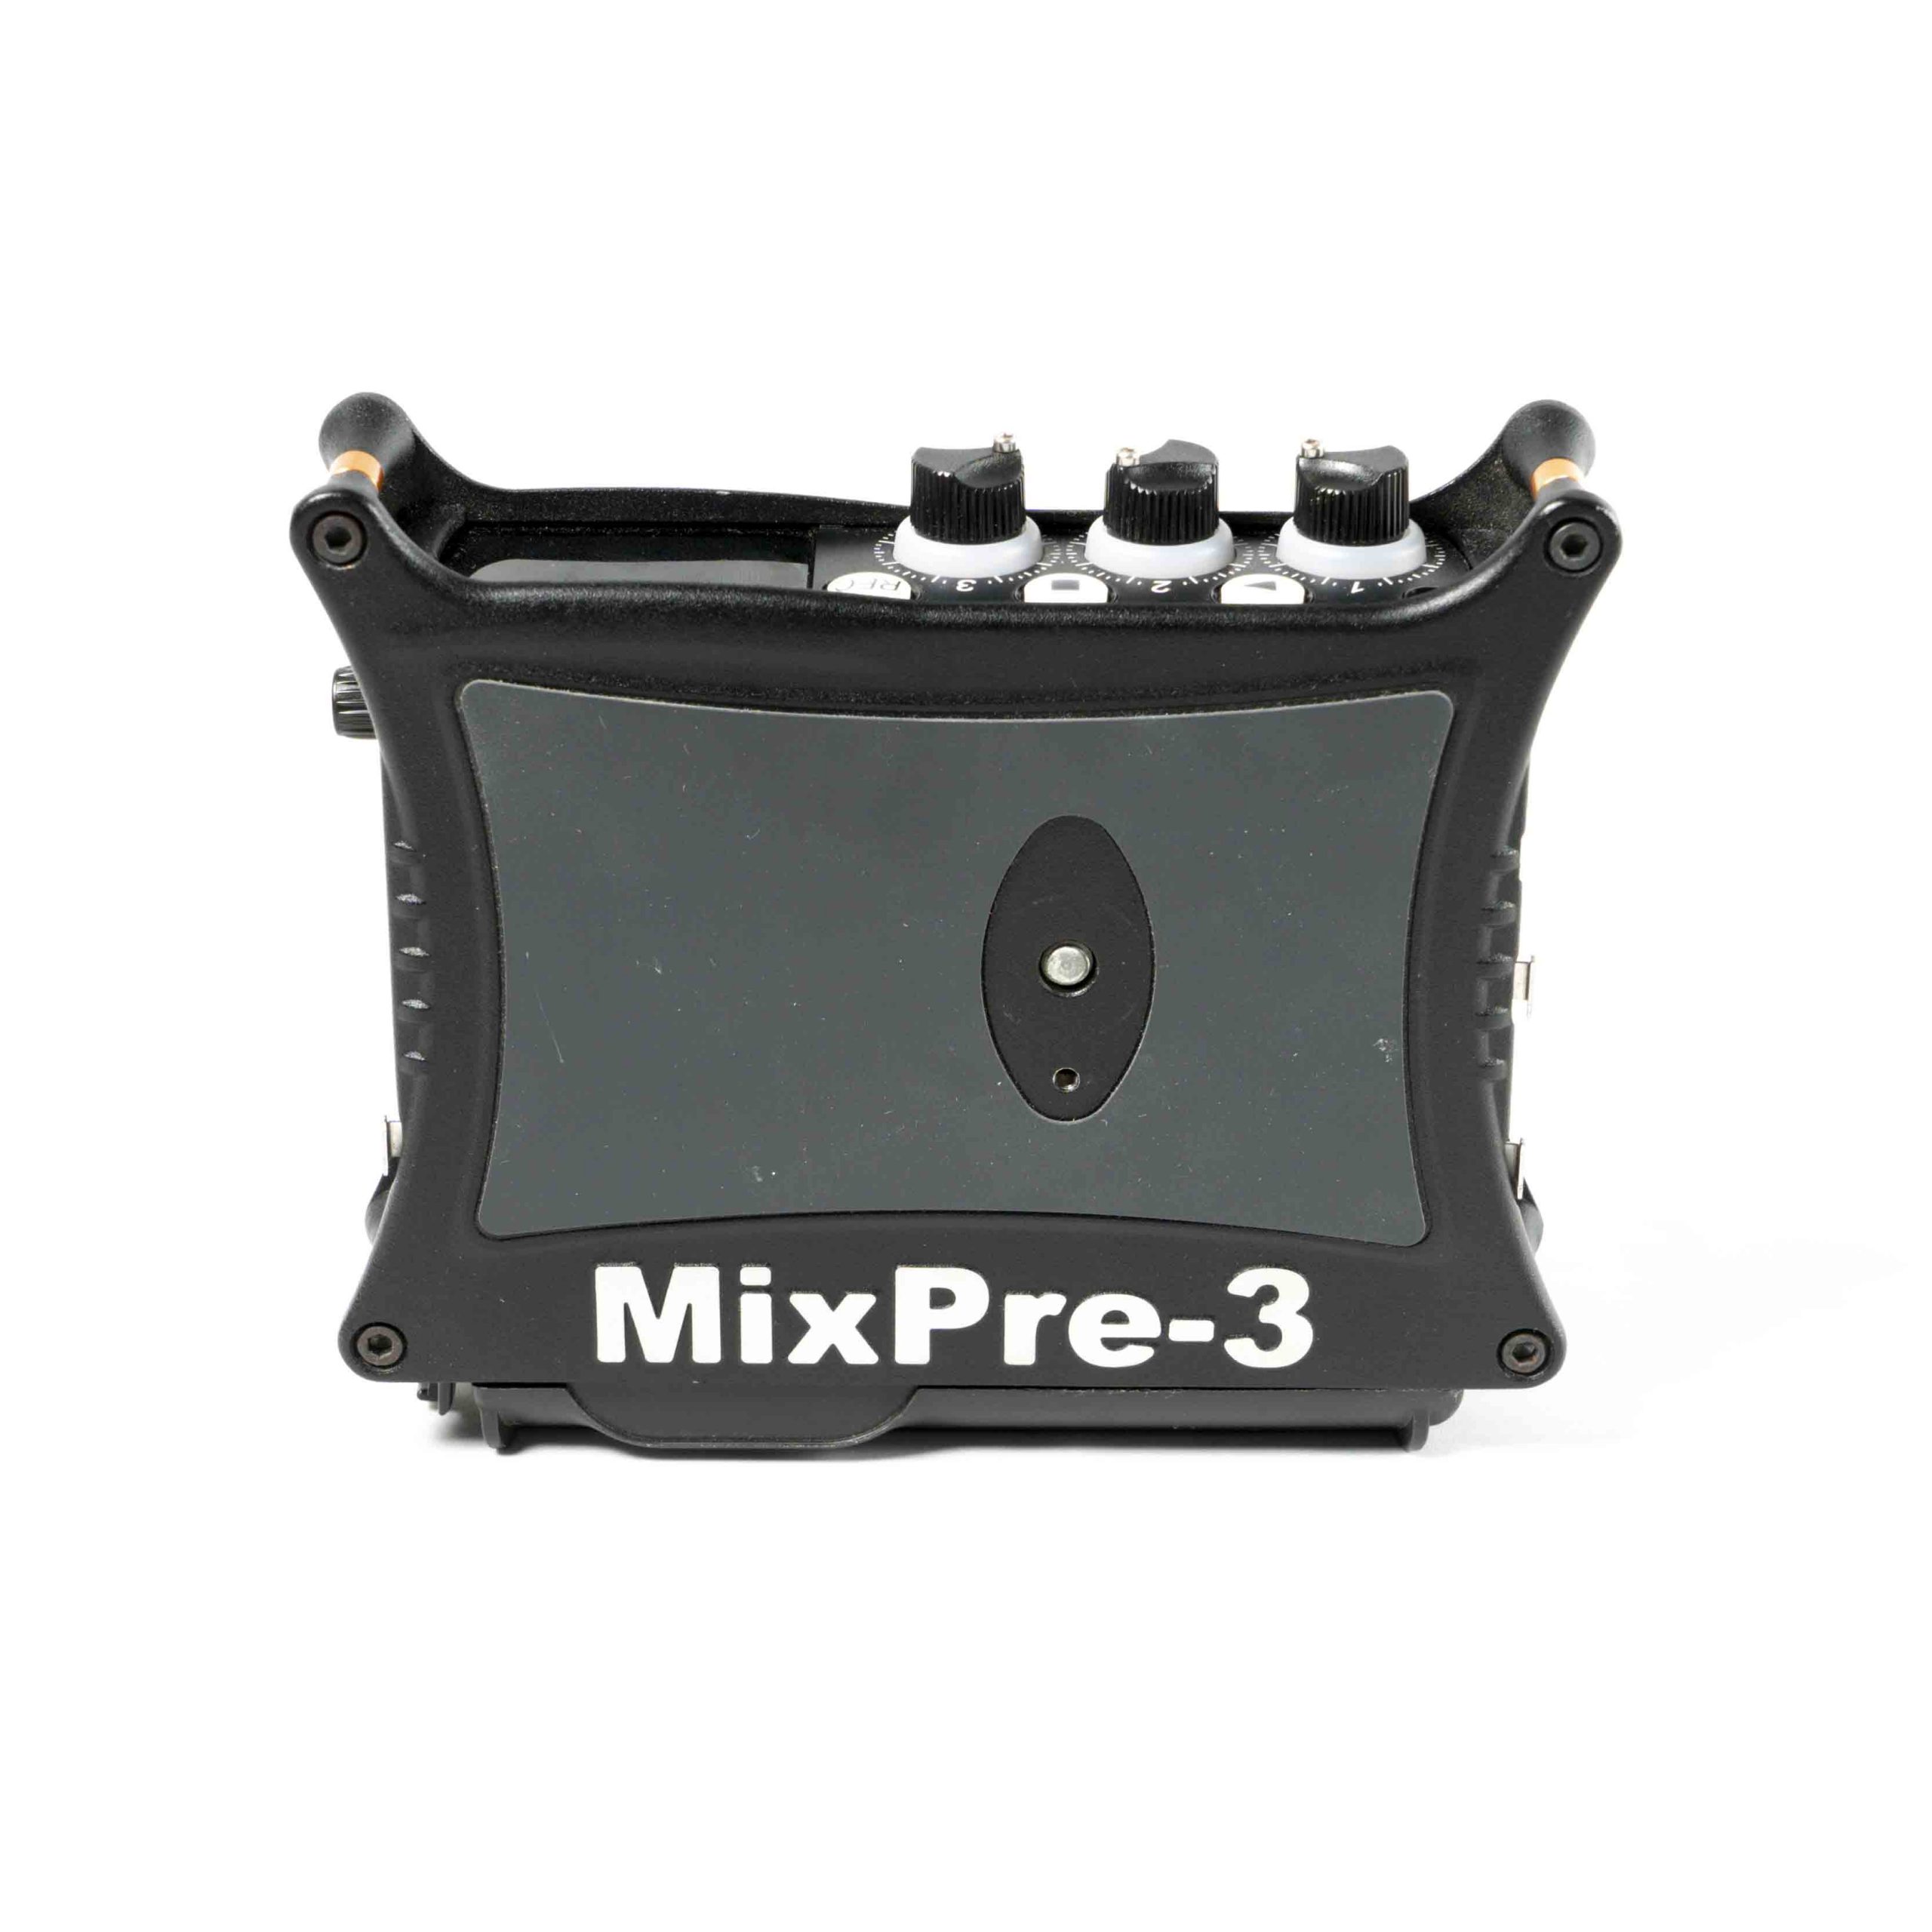 Sounddevices MixPre 3